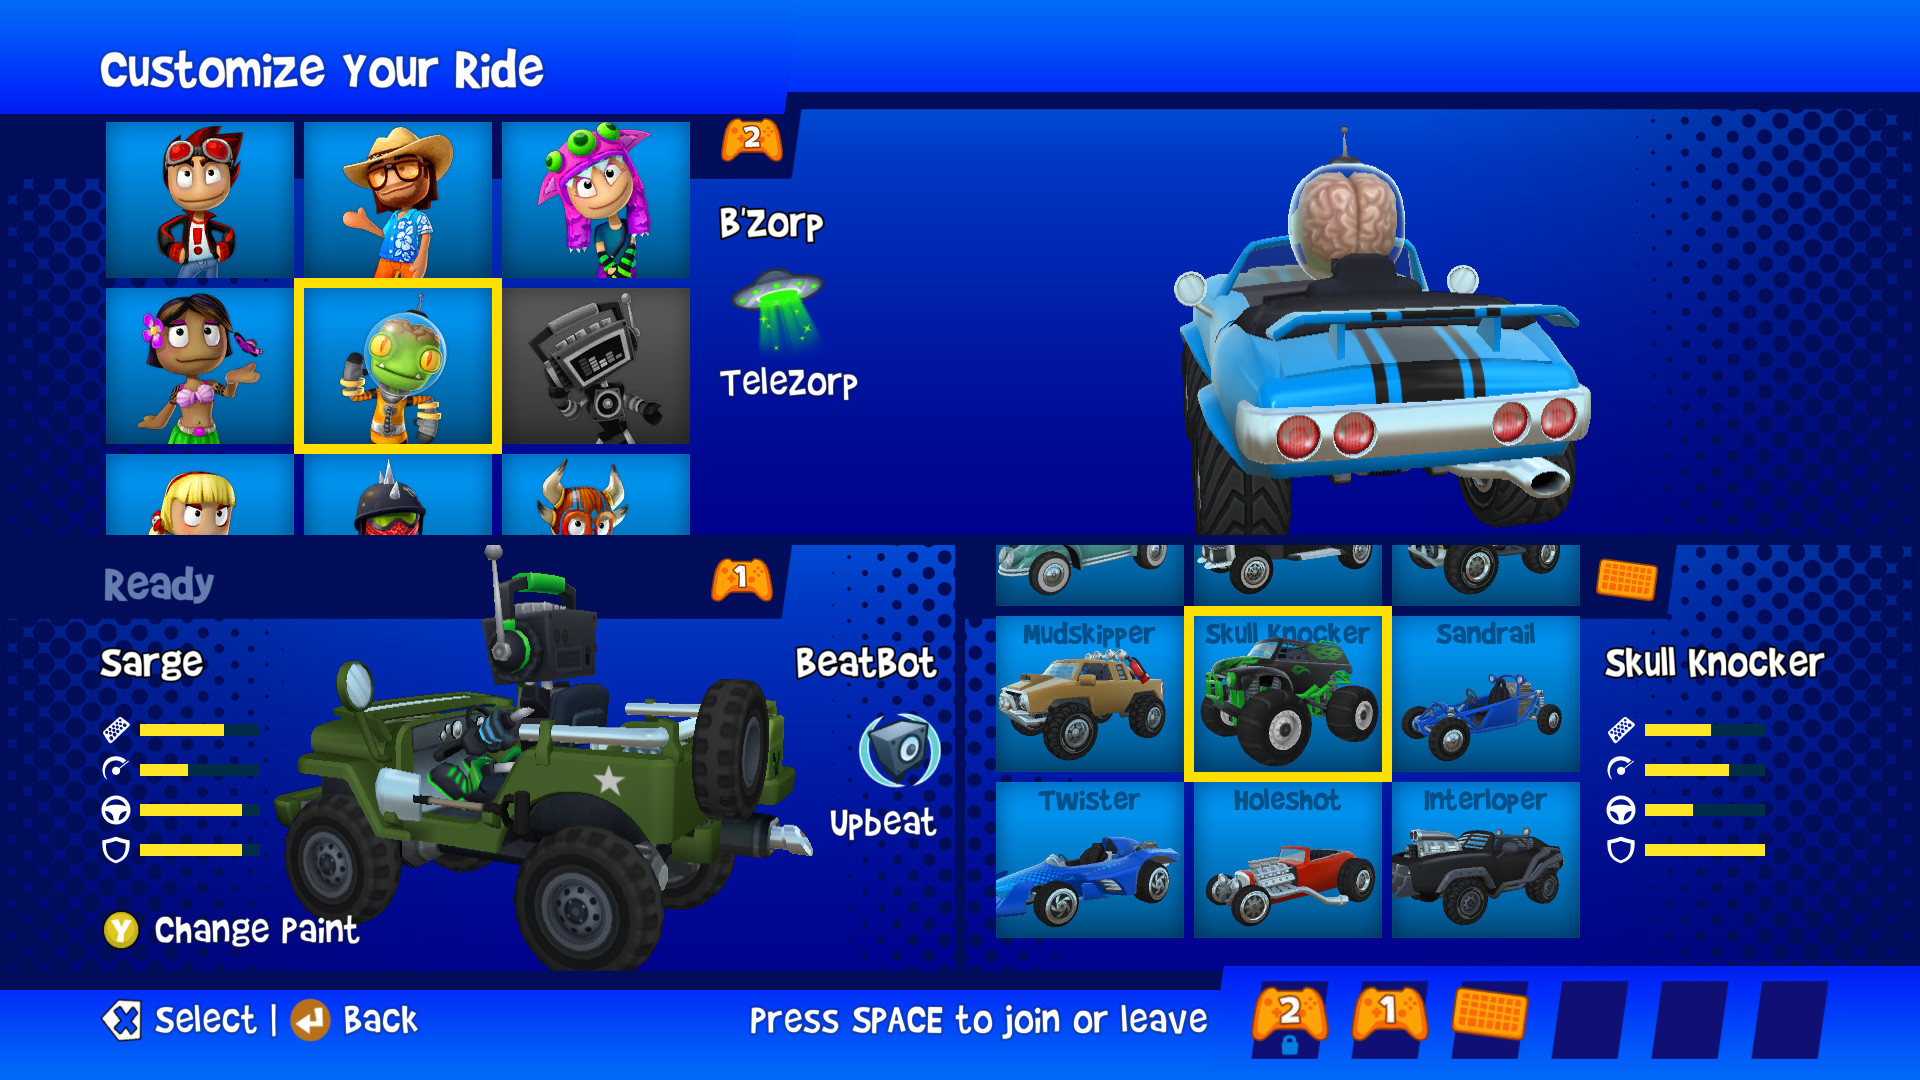 beach buggy racing for pc